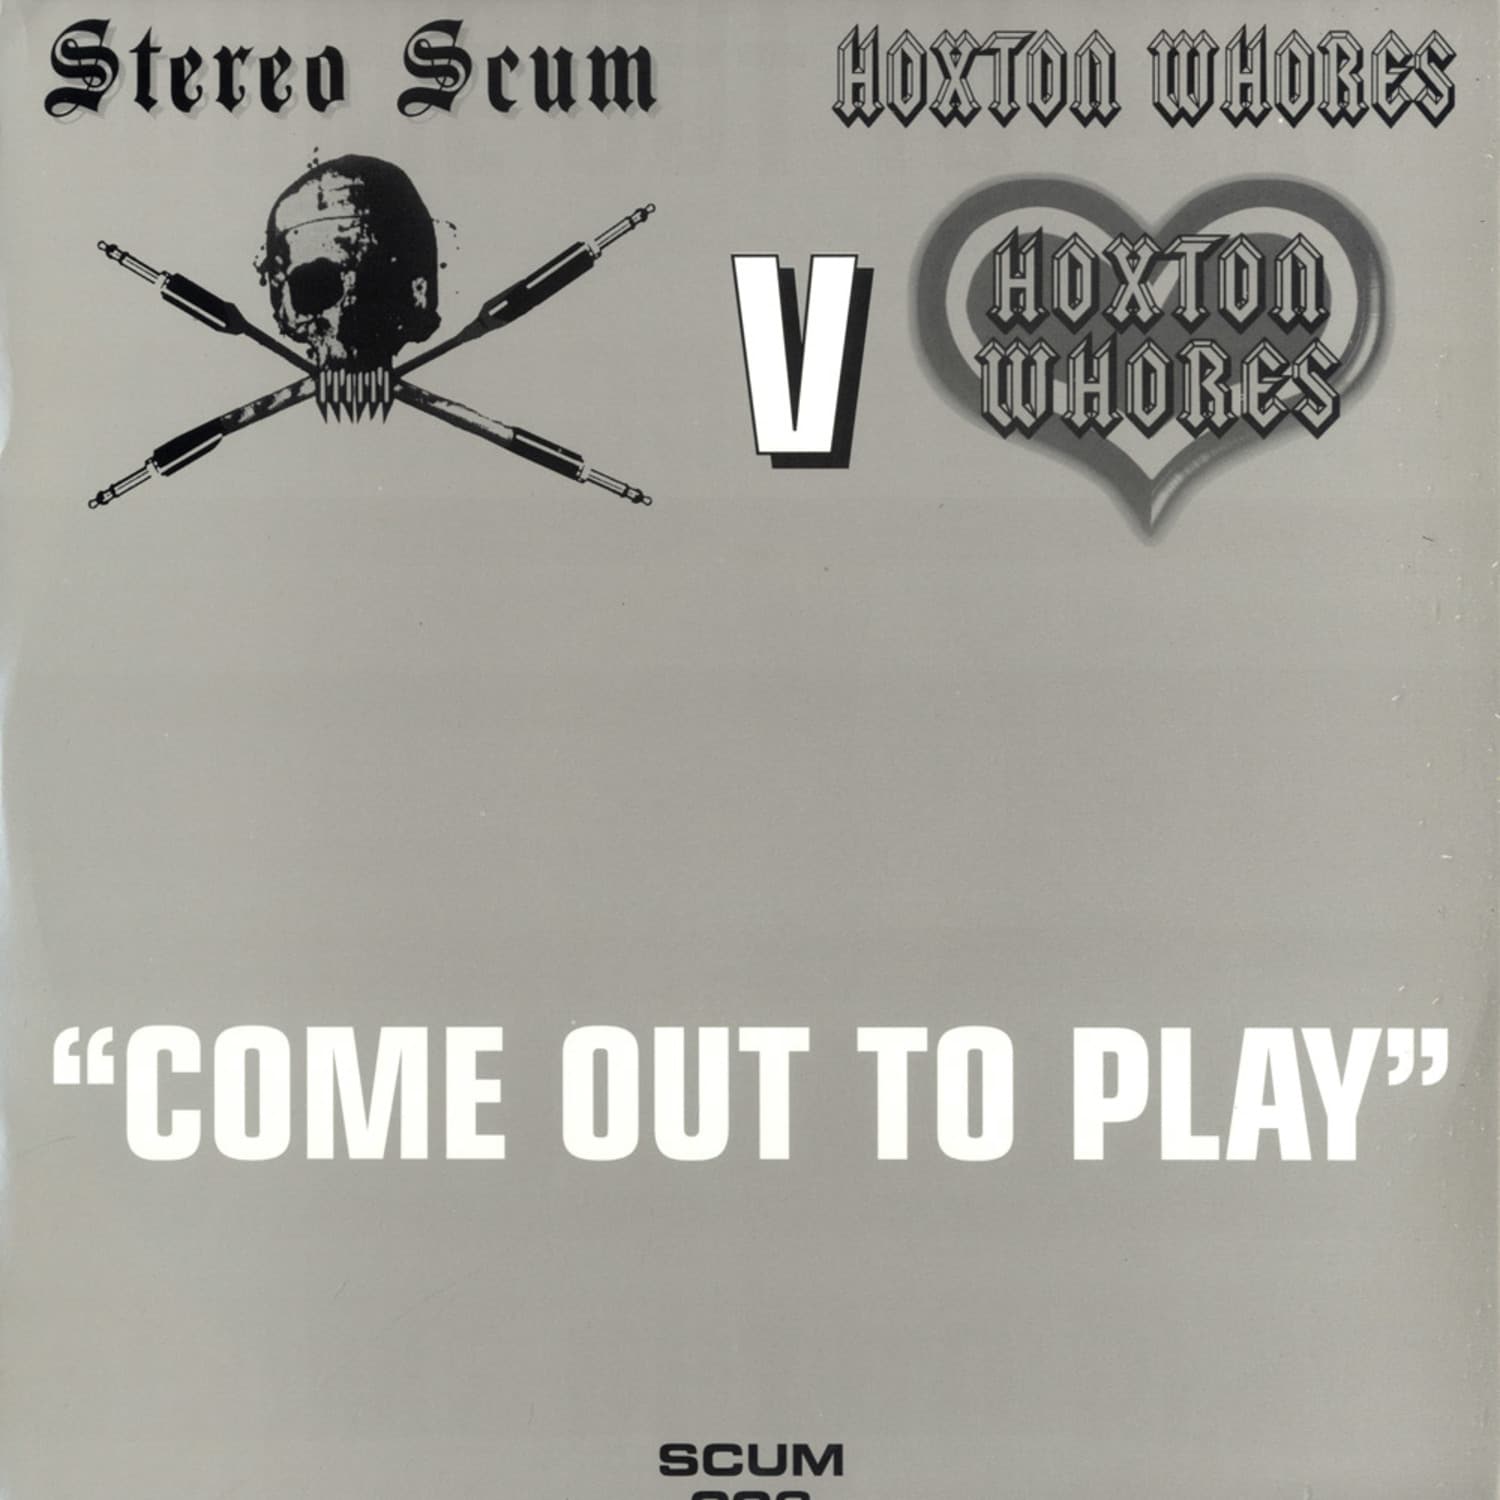 Stereo Scum vs Hoxton Hores - COME OUT TO PLAY